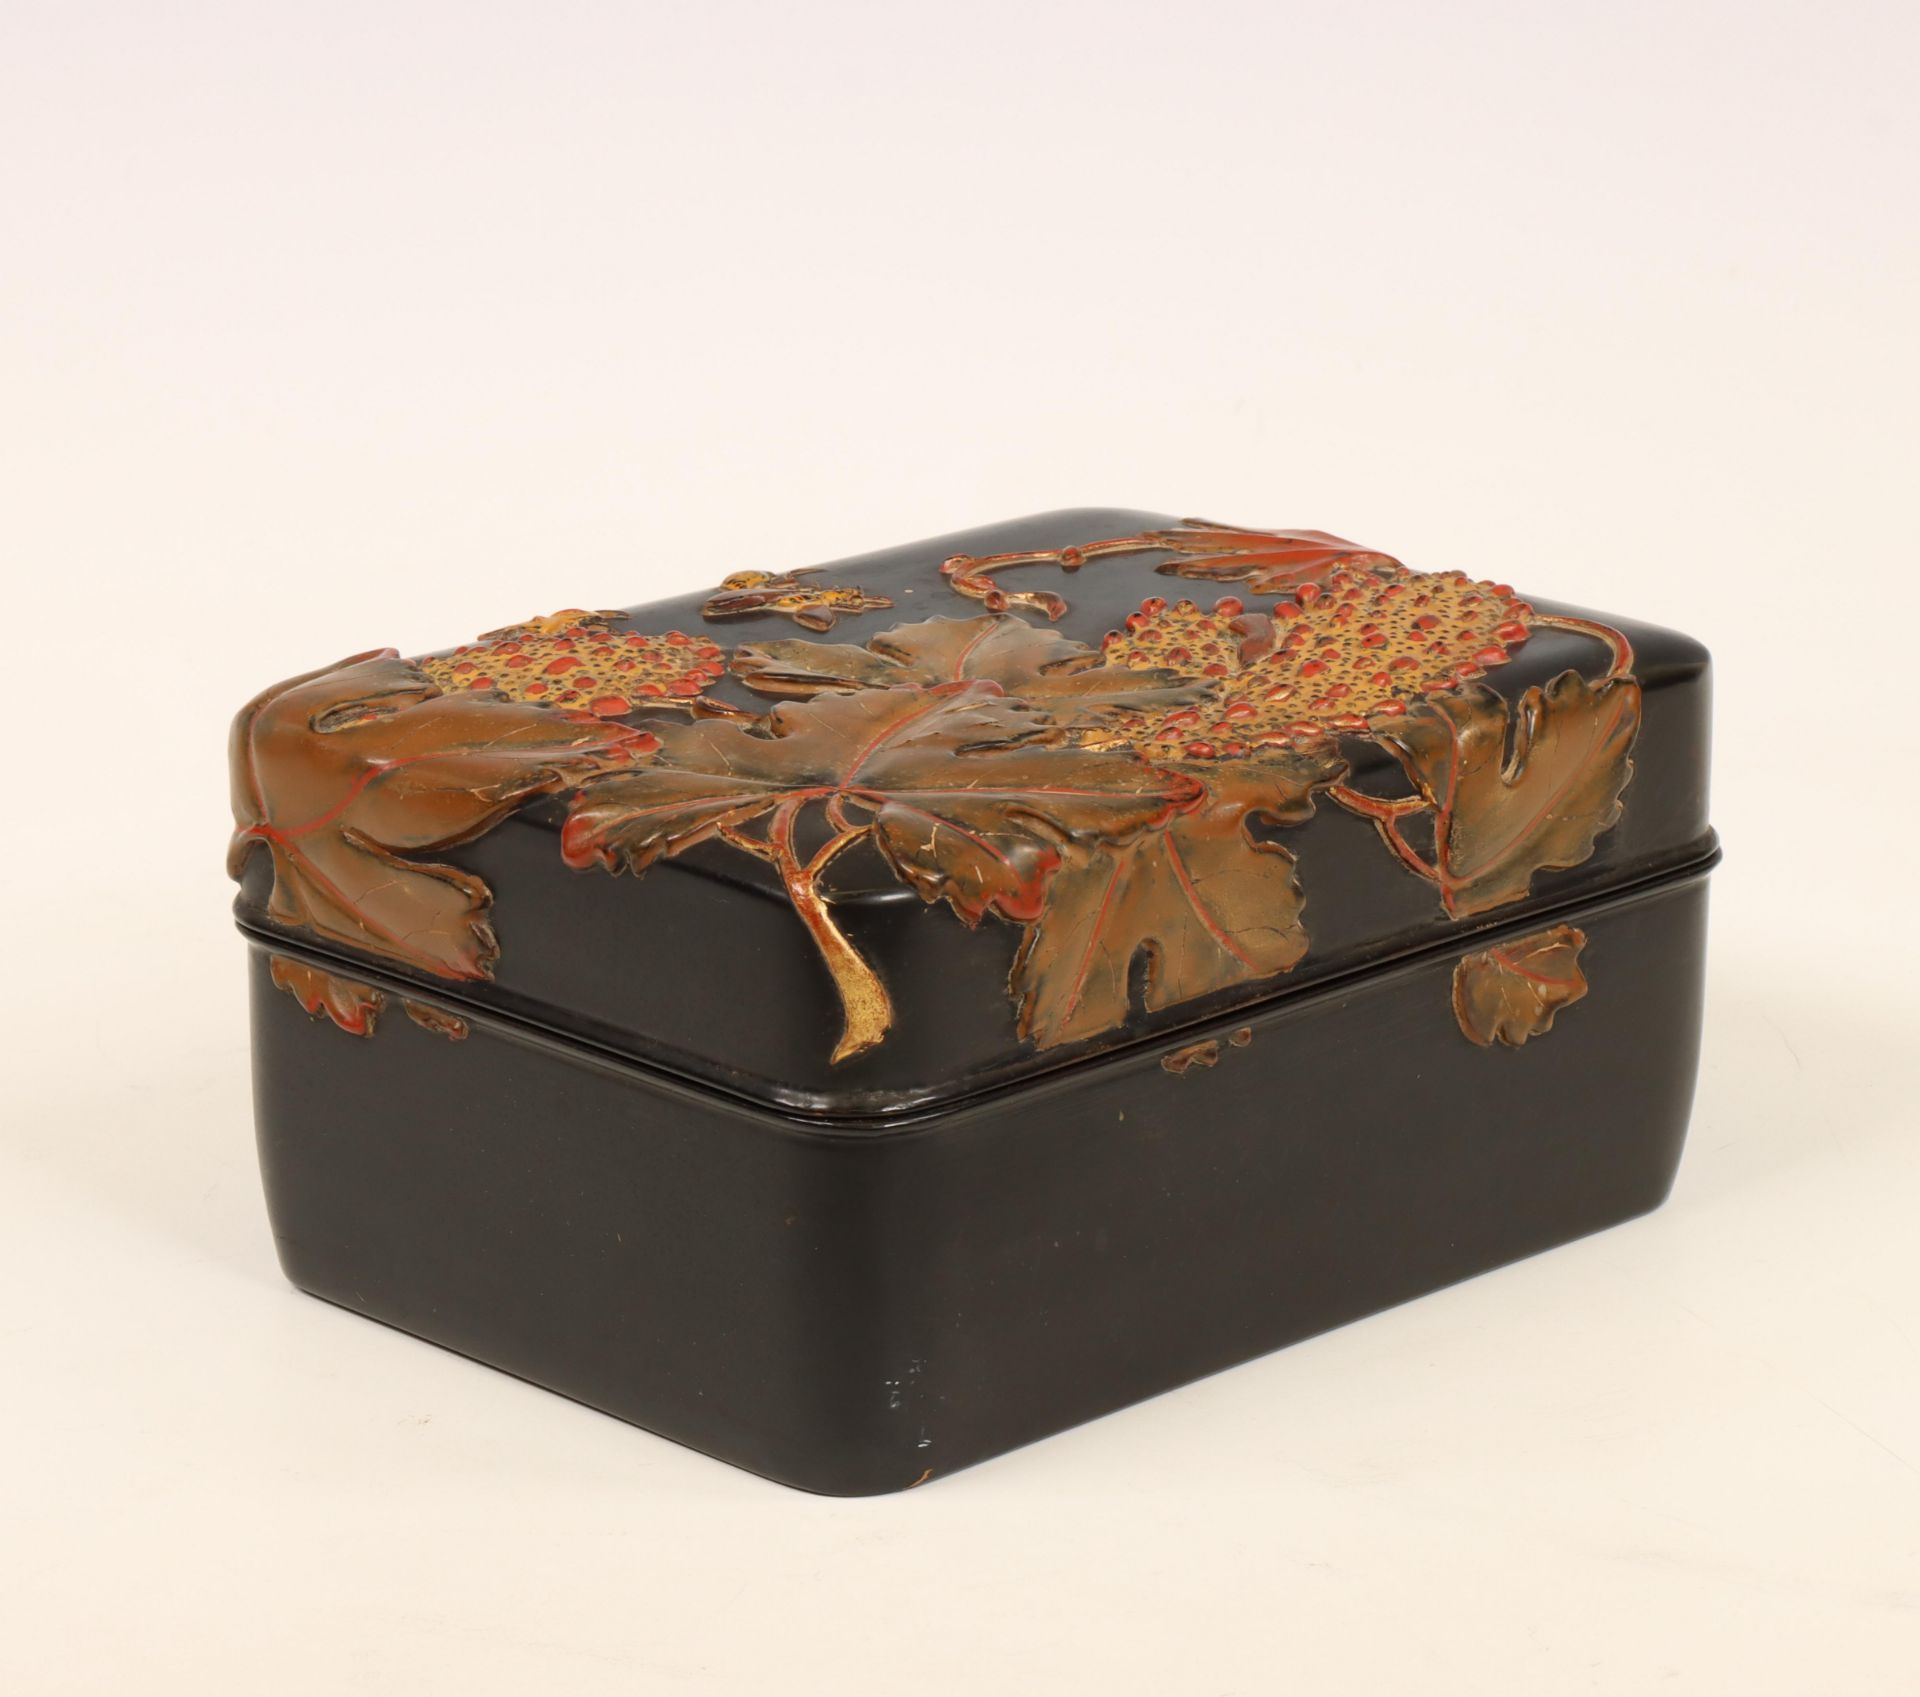 Japan, black-lacquer decorated box and cover, early 20th century,